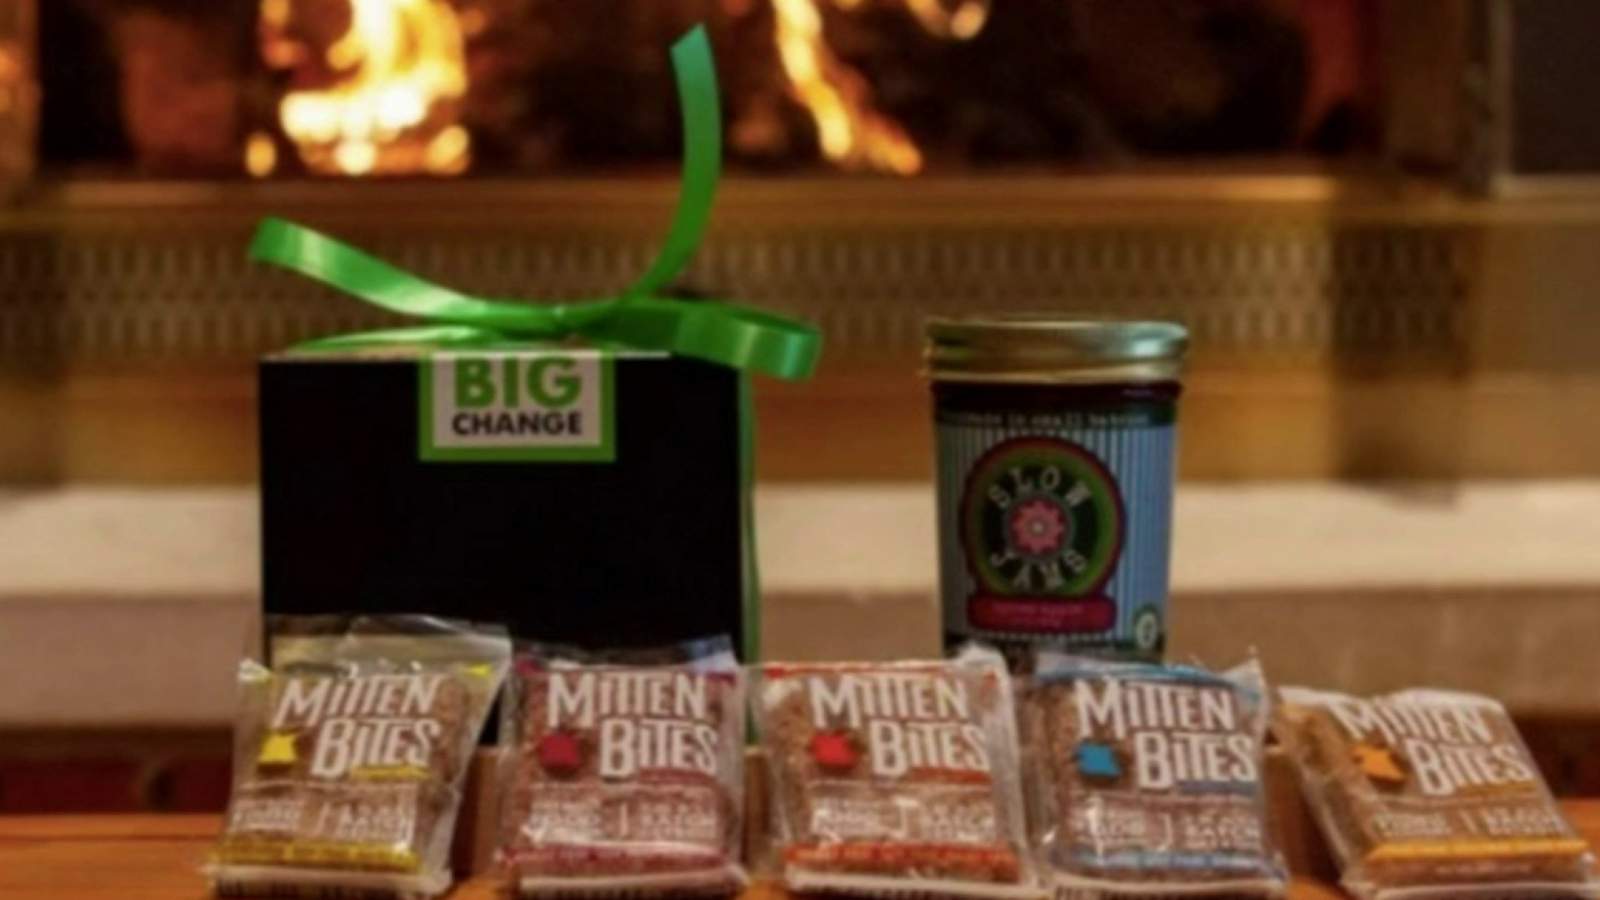 This holiday box is filled with Michigan made treats! - WDIV ClickOnDetroit